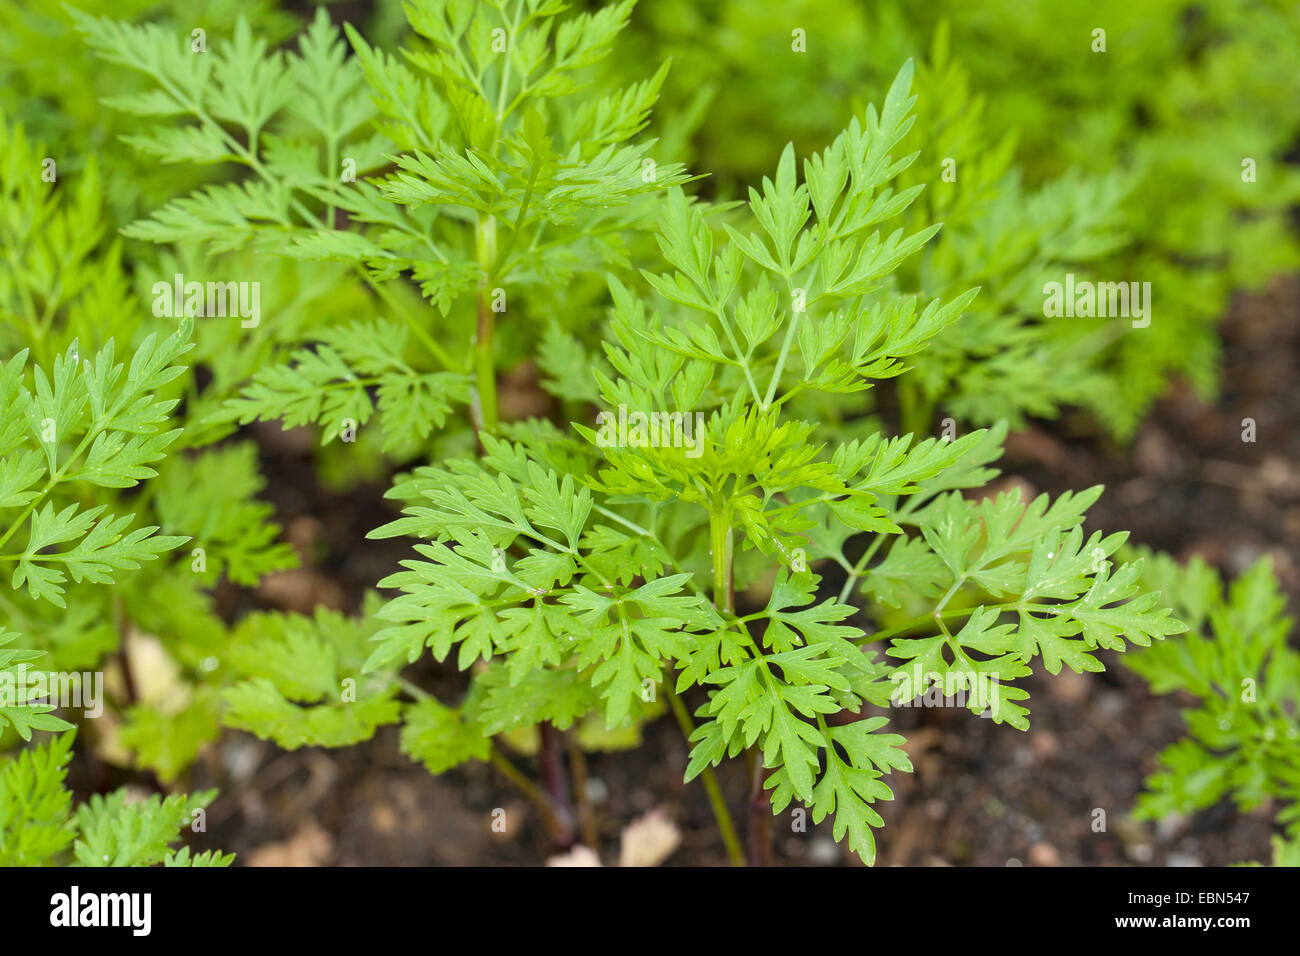 Fool's parsley, Fool's cicely, Poison parsley (Aethusa cynapium, Aethusa cynapium subsp. cynapium), leaves, Germany Stock Photo